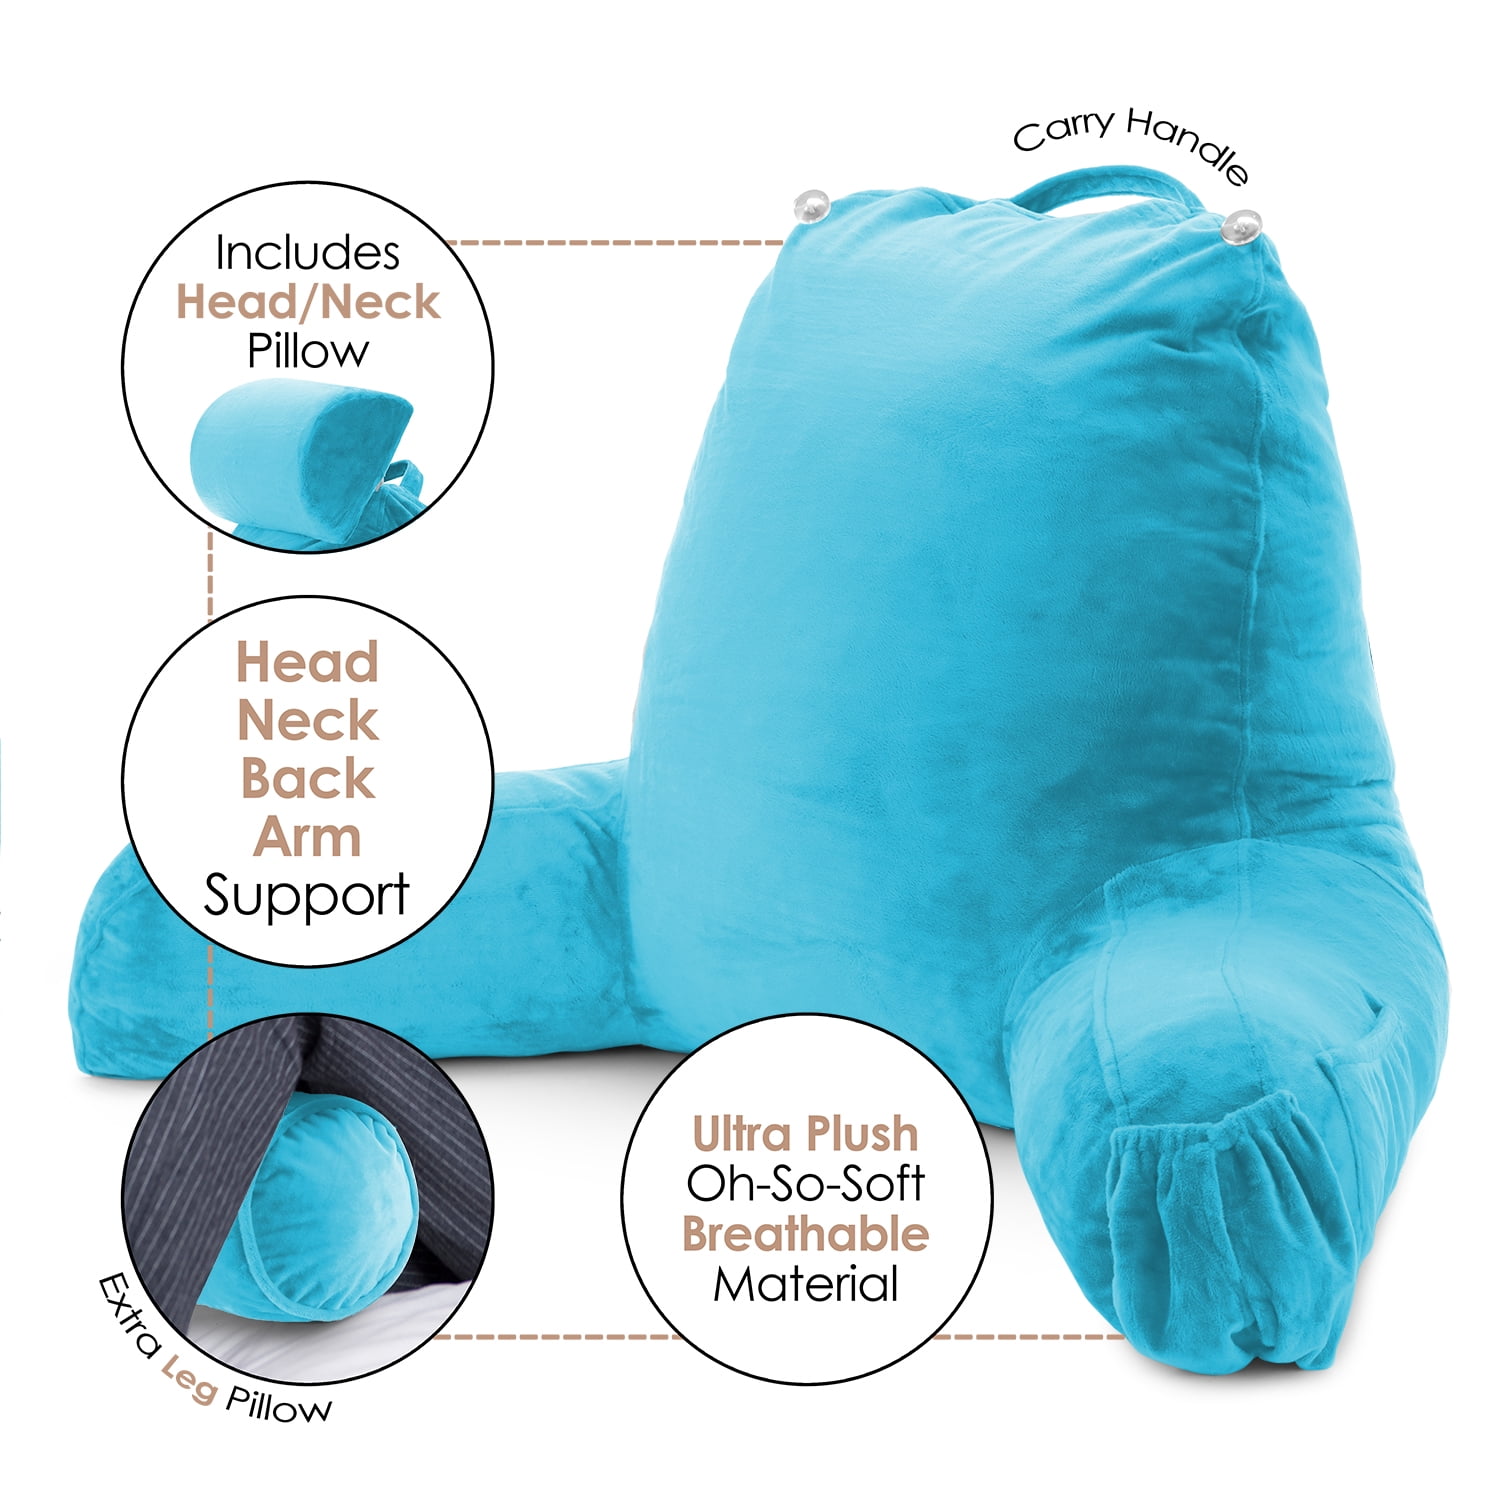 Nestl Cut Plush Striped Reading Pillow - Back Support Shredded Memory Foam Bed Rest Pillow with Arms - Medium - Teal